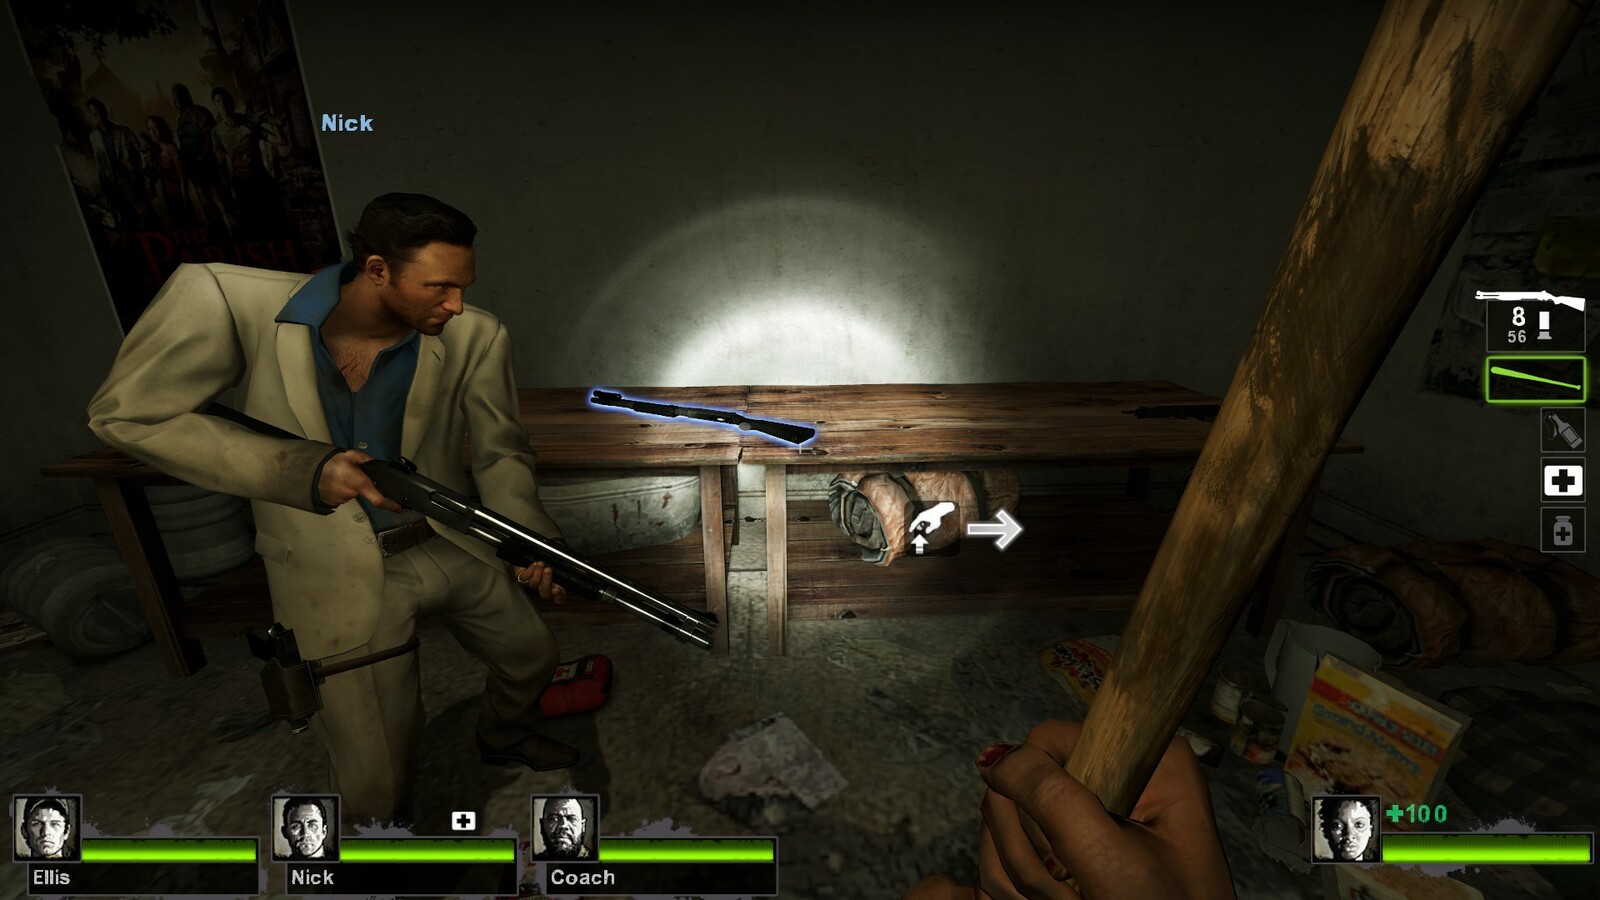 The first safe house has low tier weapons for the player and limited resources.